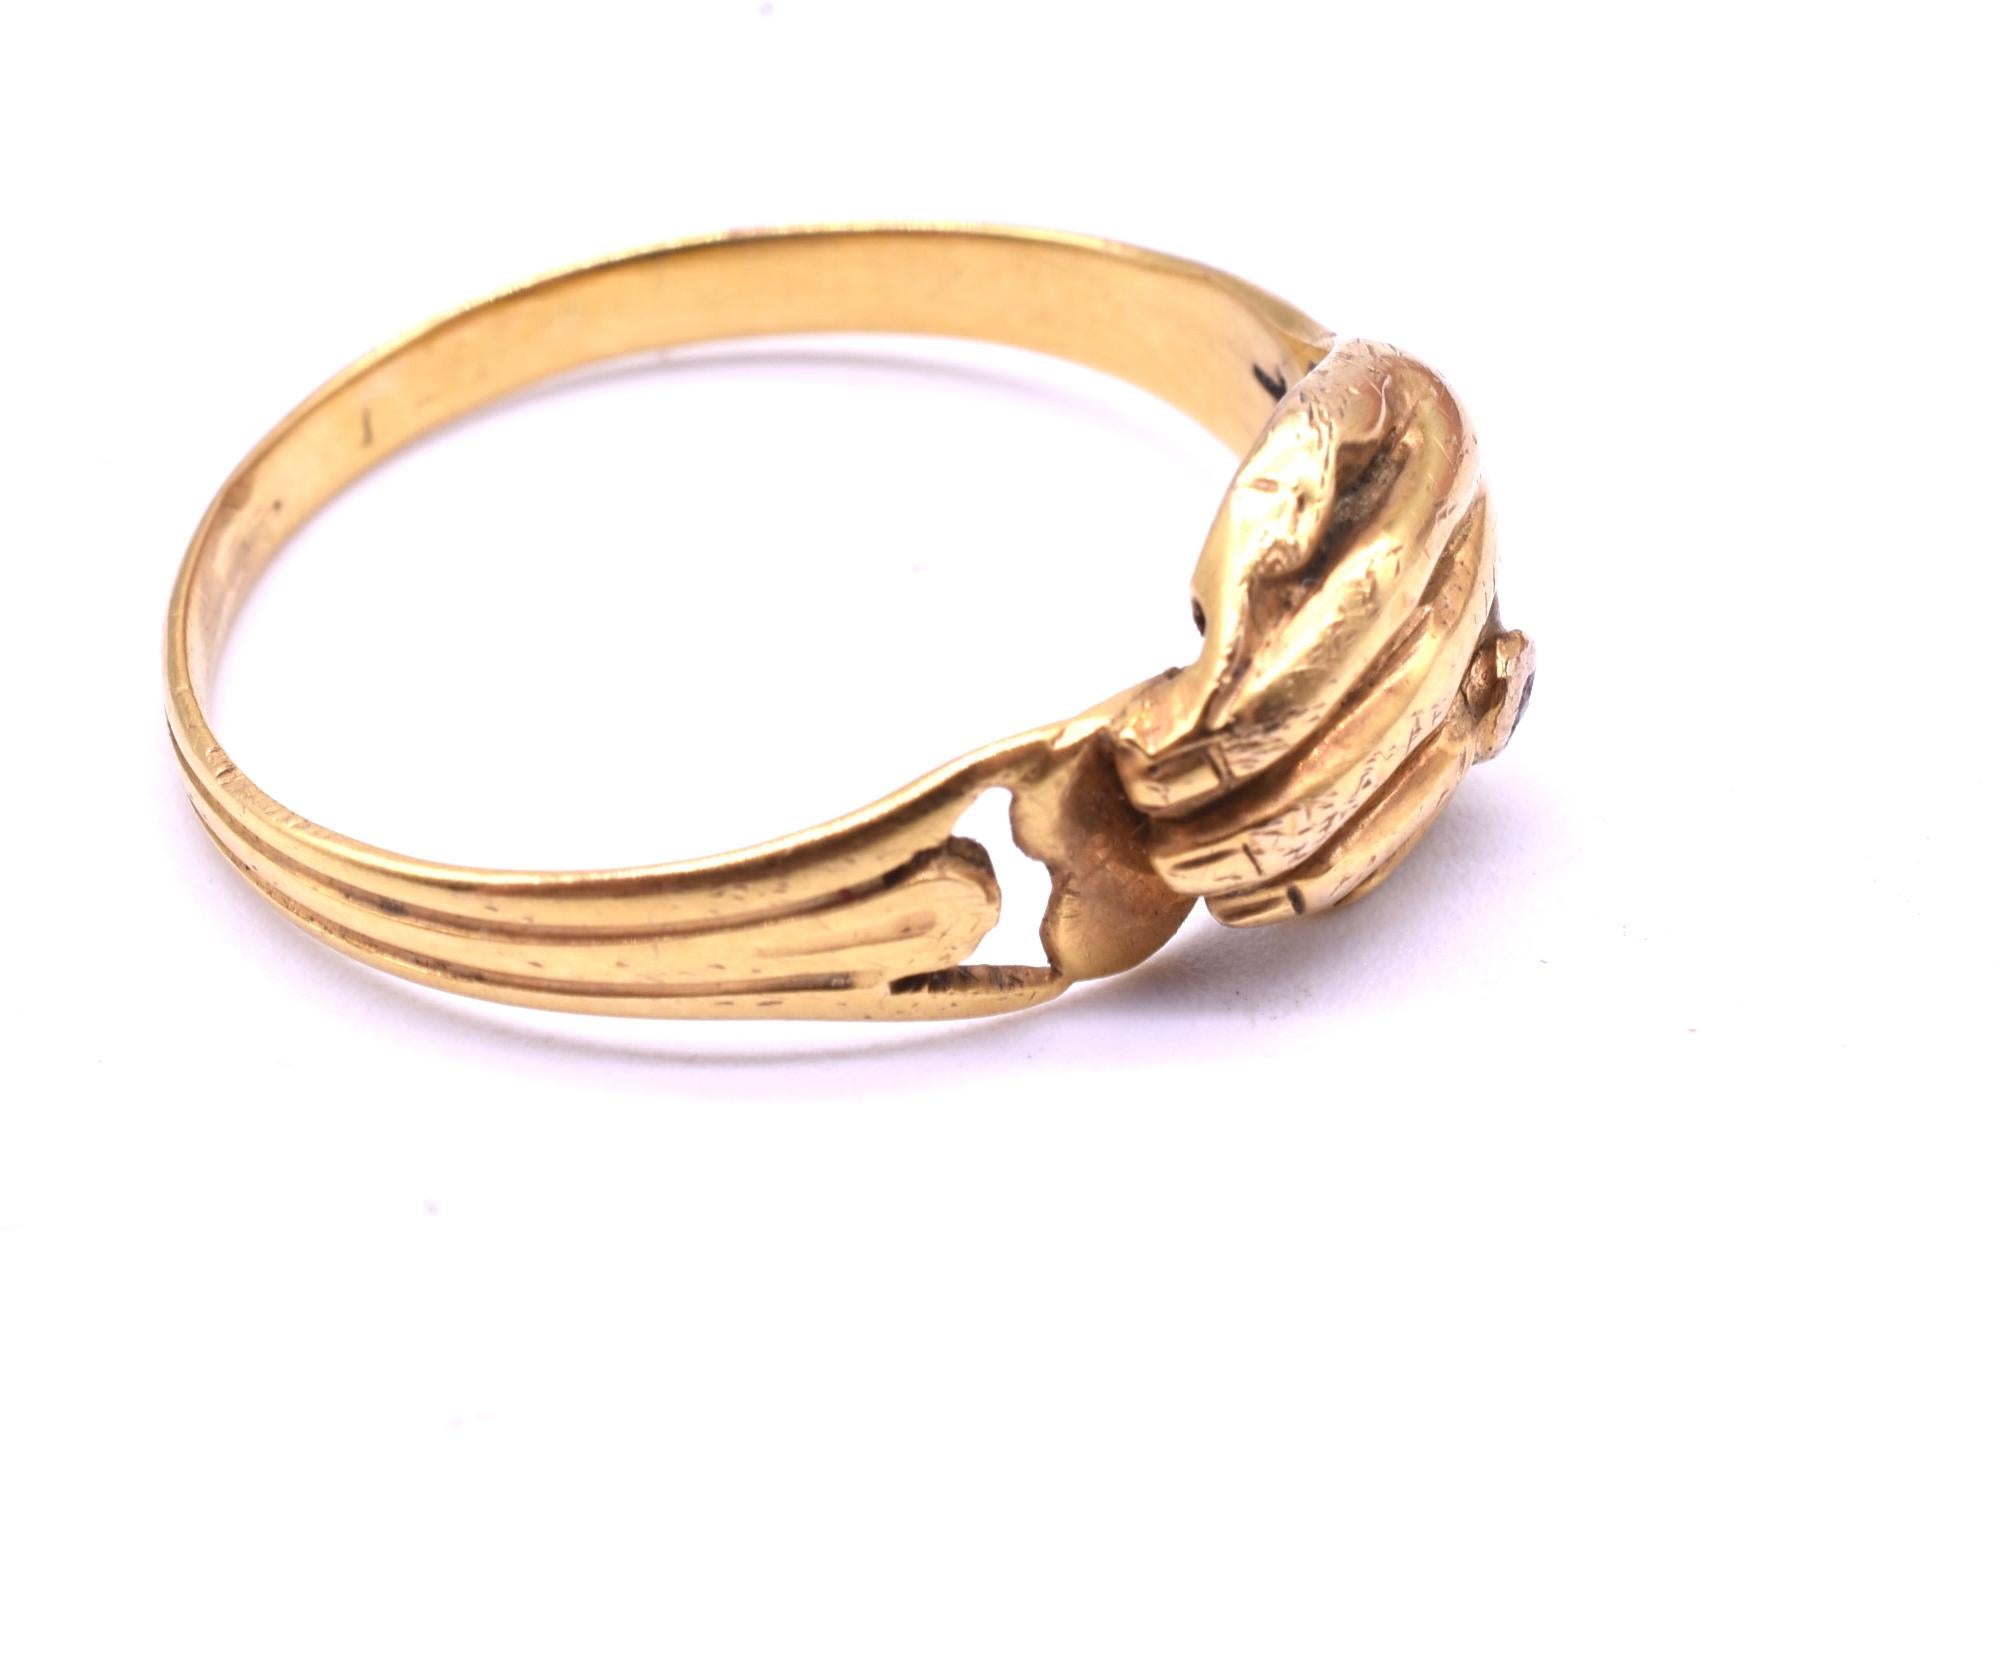 Delightful 18K hand over heart fede ring. - the word fede means faithful. The Victorians were fond of such romantic sentiments. The ring has a tiny diamond set on the ring finger of the gold hand, a lovely and surprising detail. The ring is a US